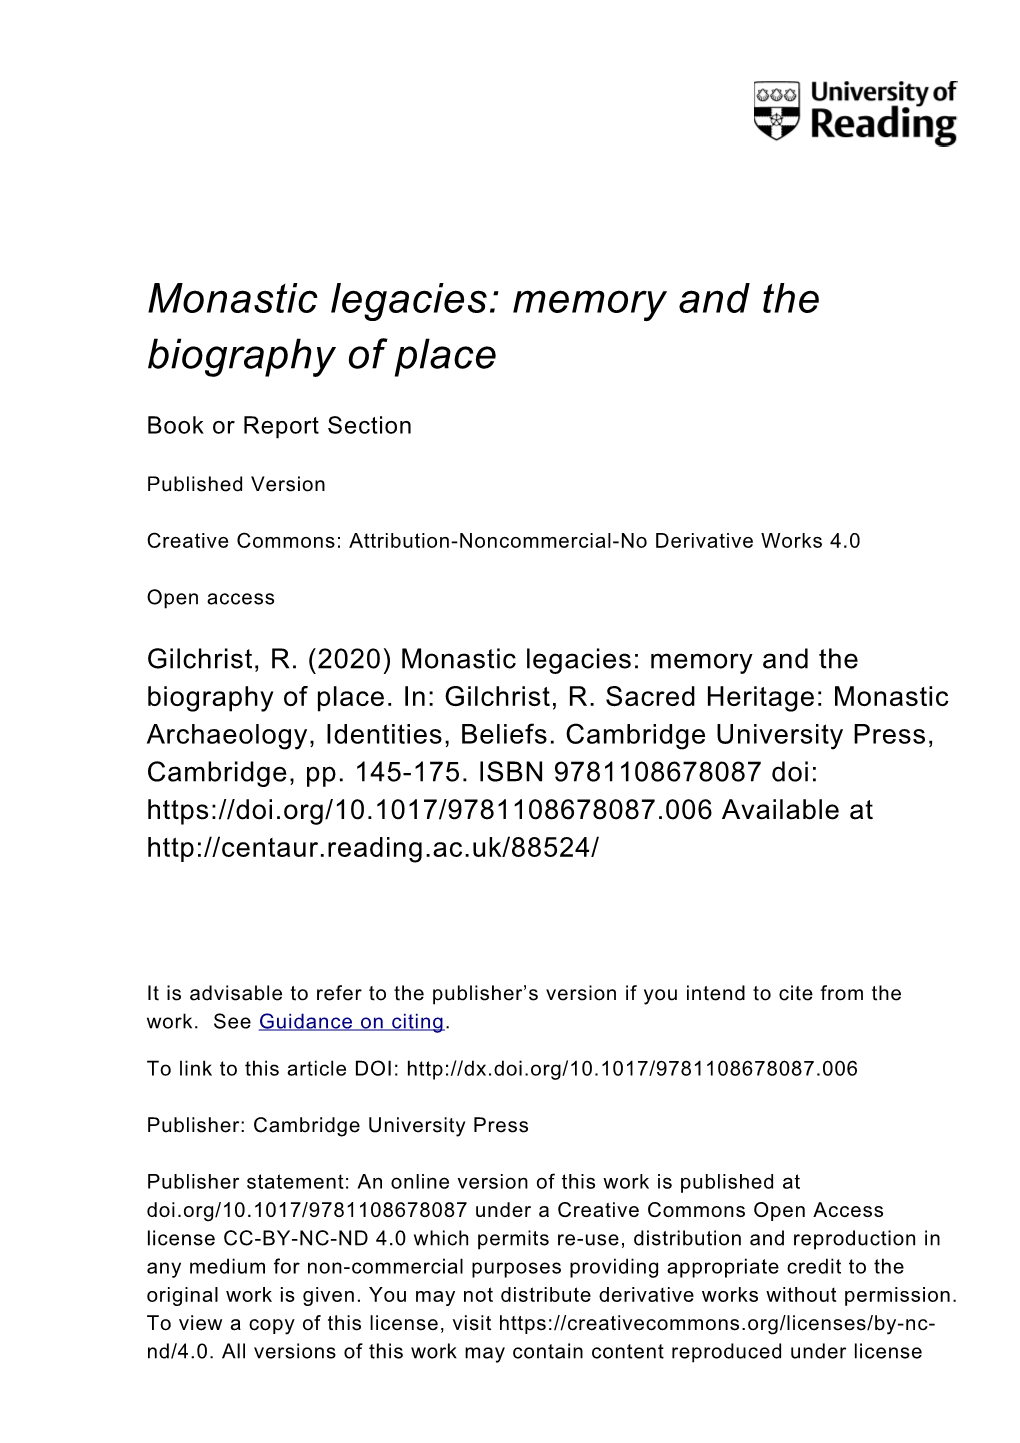 Monastic Legacies: Memory and the Biography of Place